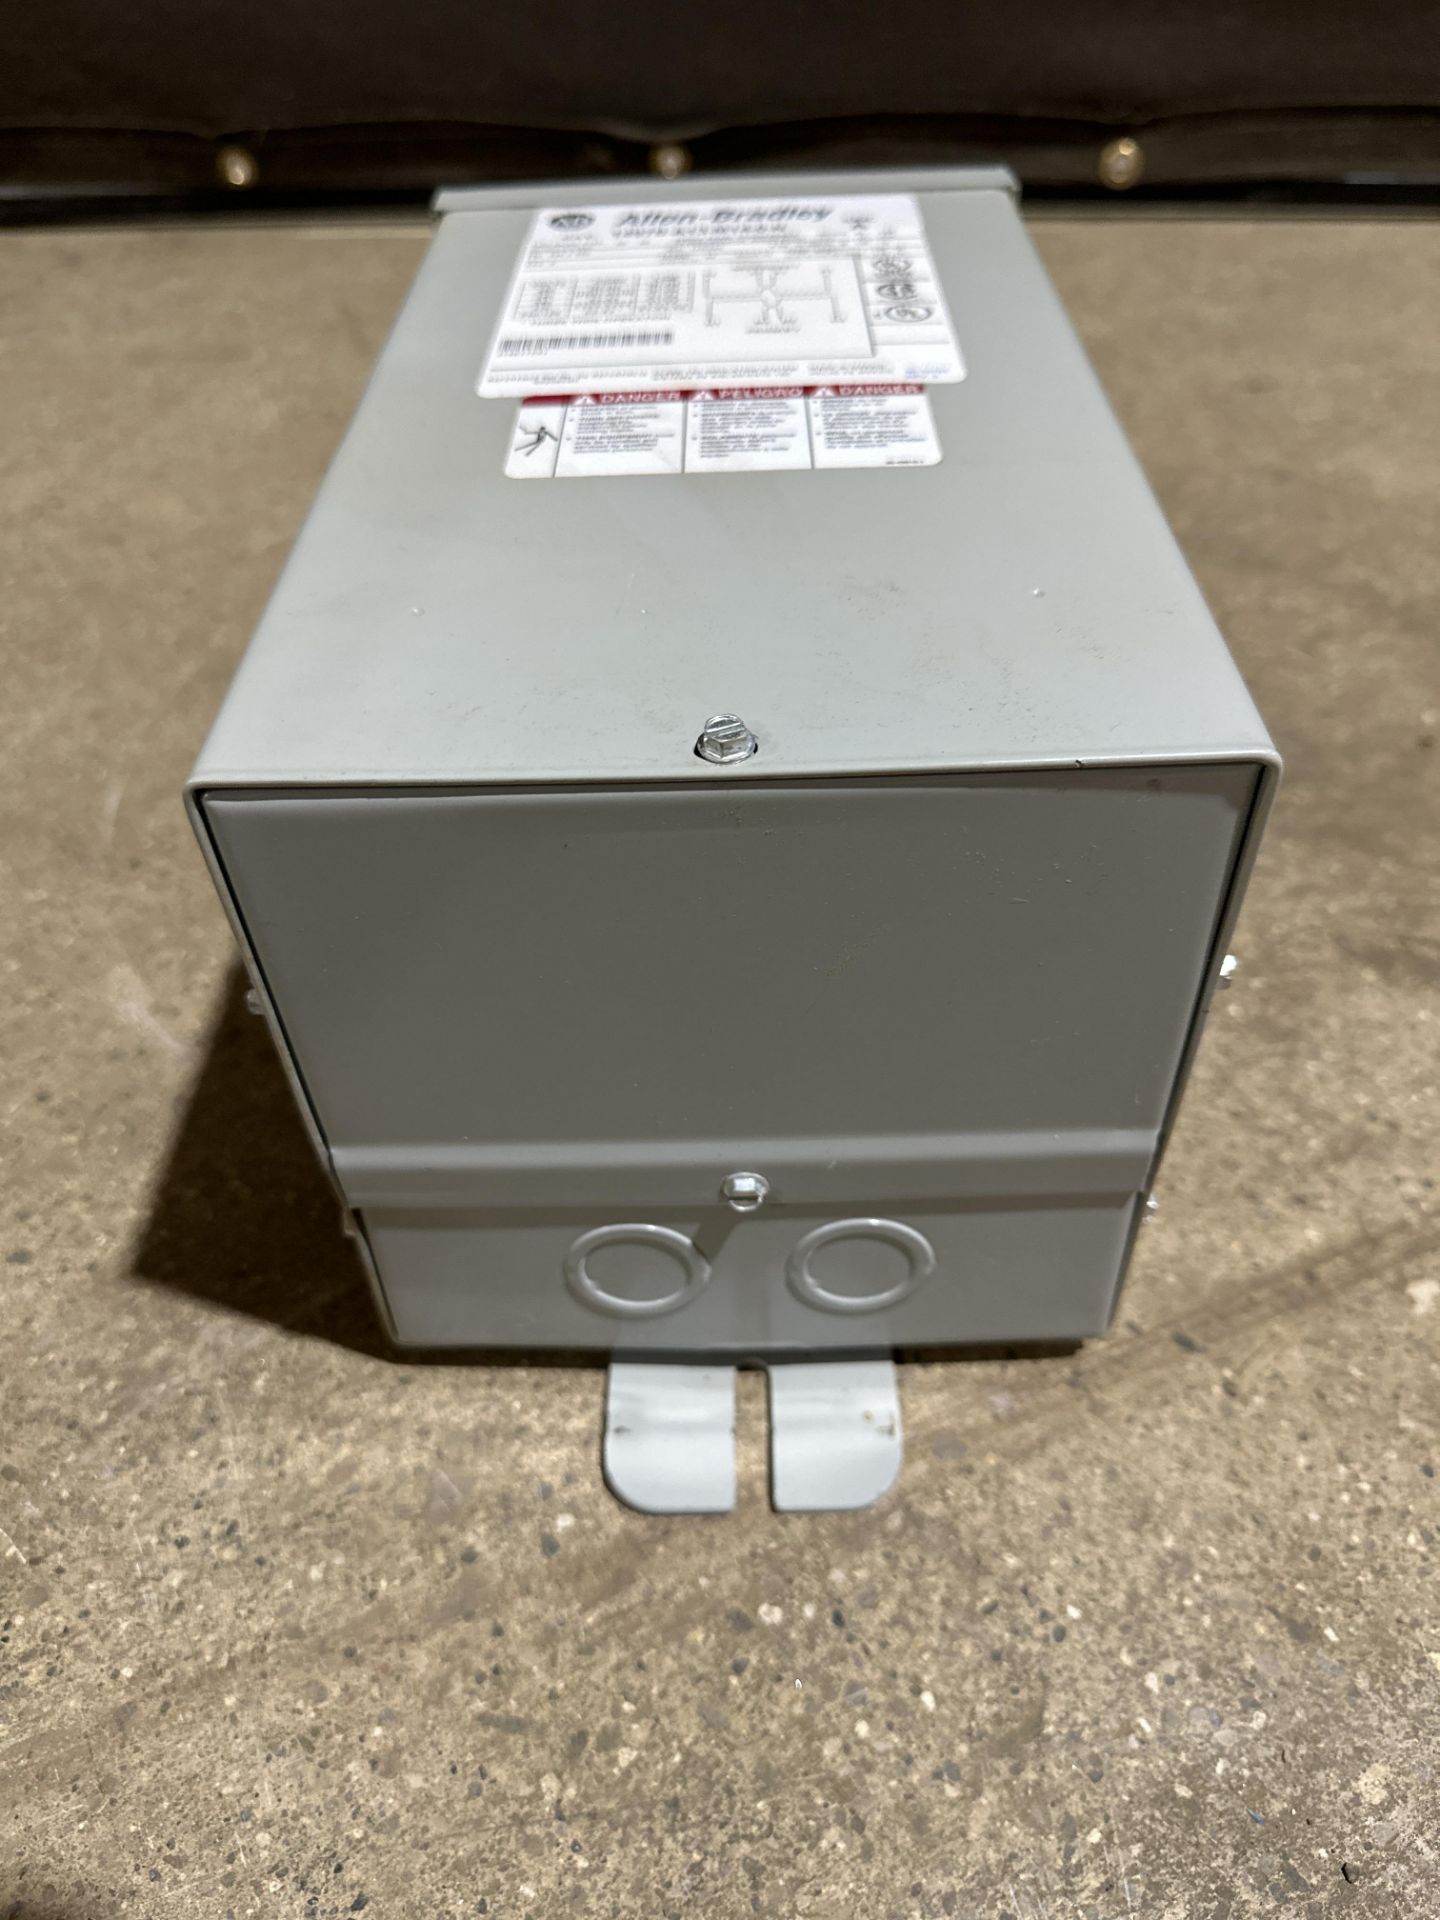 NEW IN BOX ALLEN BRADLEY 1479D-A13-M14-0-N TRANSFORMER 240/480 PRIMARY 120/240 SECONDARY 2 KVA - Image 5 of 6